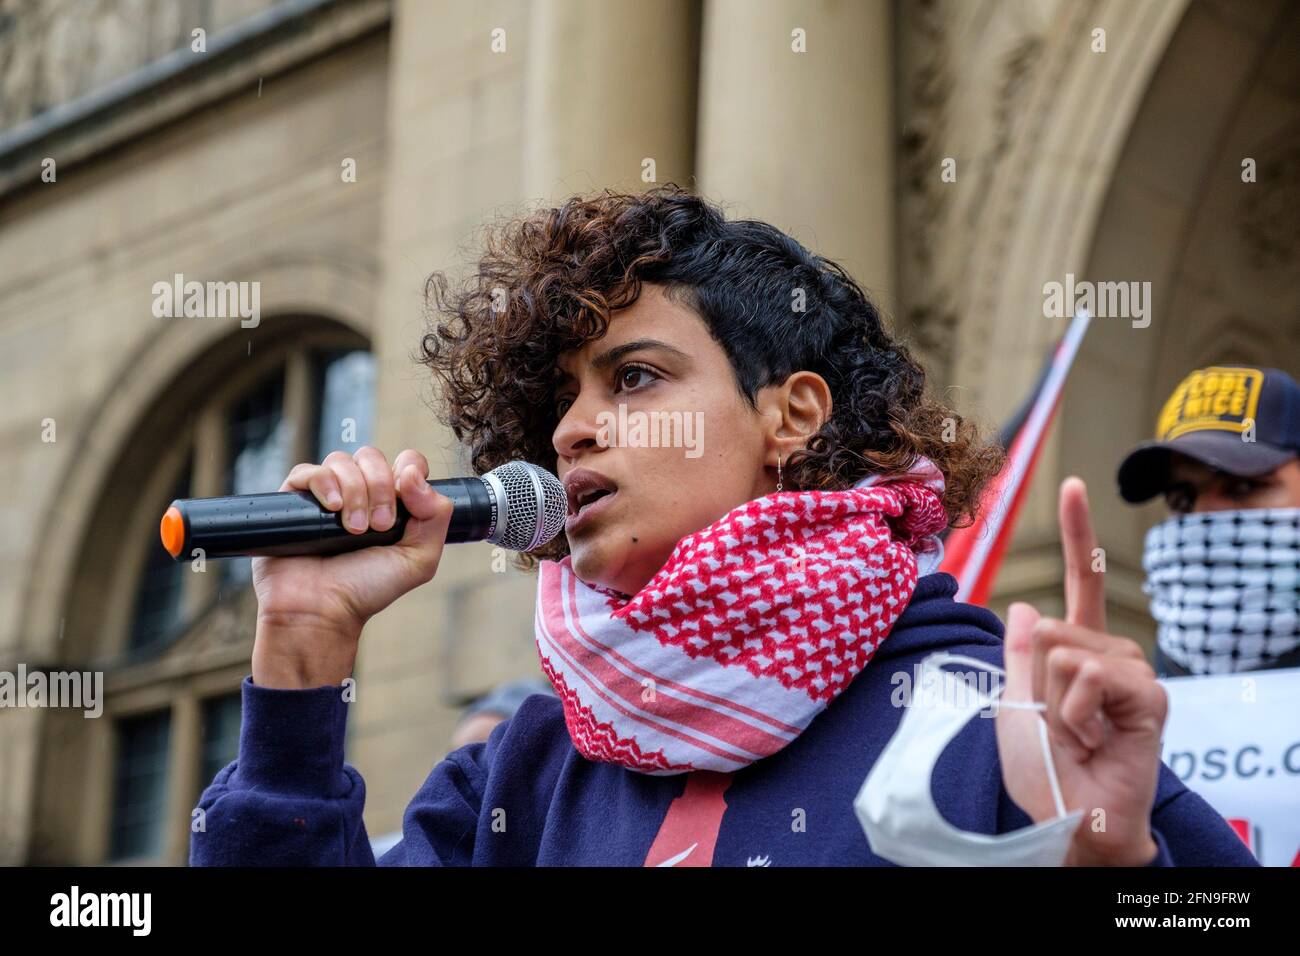 Sheffield, UK- May 15th 2021: Protesters hold placards and flags during a 'Sheffield Palestine Solidarity Campaign' protest outside Sheffield Town Hall in the city centre. The protestors were demonstrating against the recent attacks by Israeli military forces against Palestines in the Gaza Strip and clashes in East Jerusalem. Credit: Mark Harvey/Alamy Live News Stock Photo